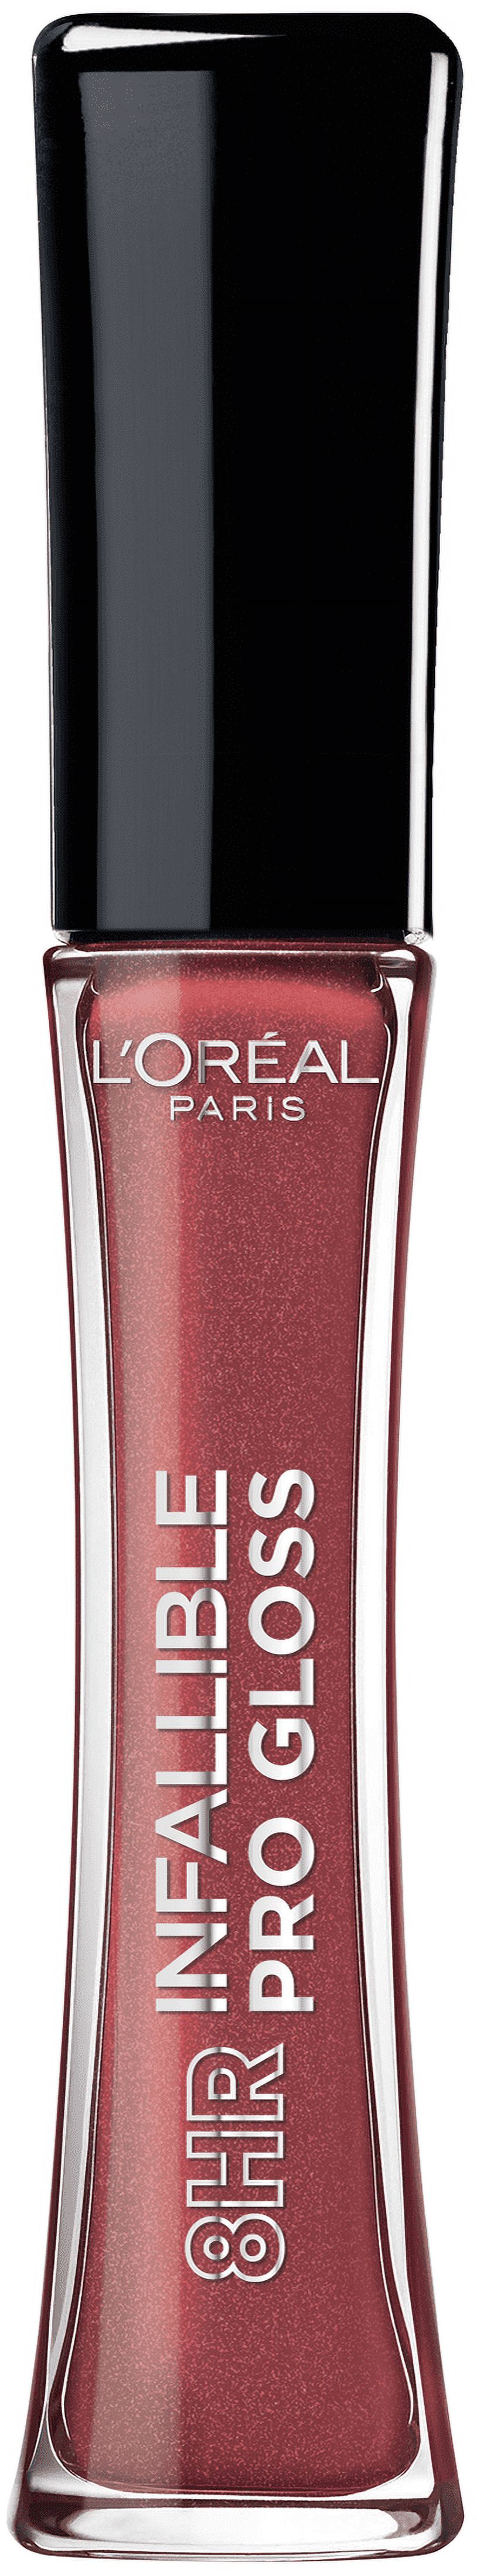 L'Oreal Paris Infallible 8 Hour Pro Hydrating Lip Gloss, Cherry Flash - image 1 of 9